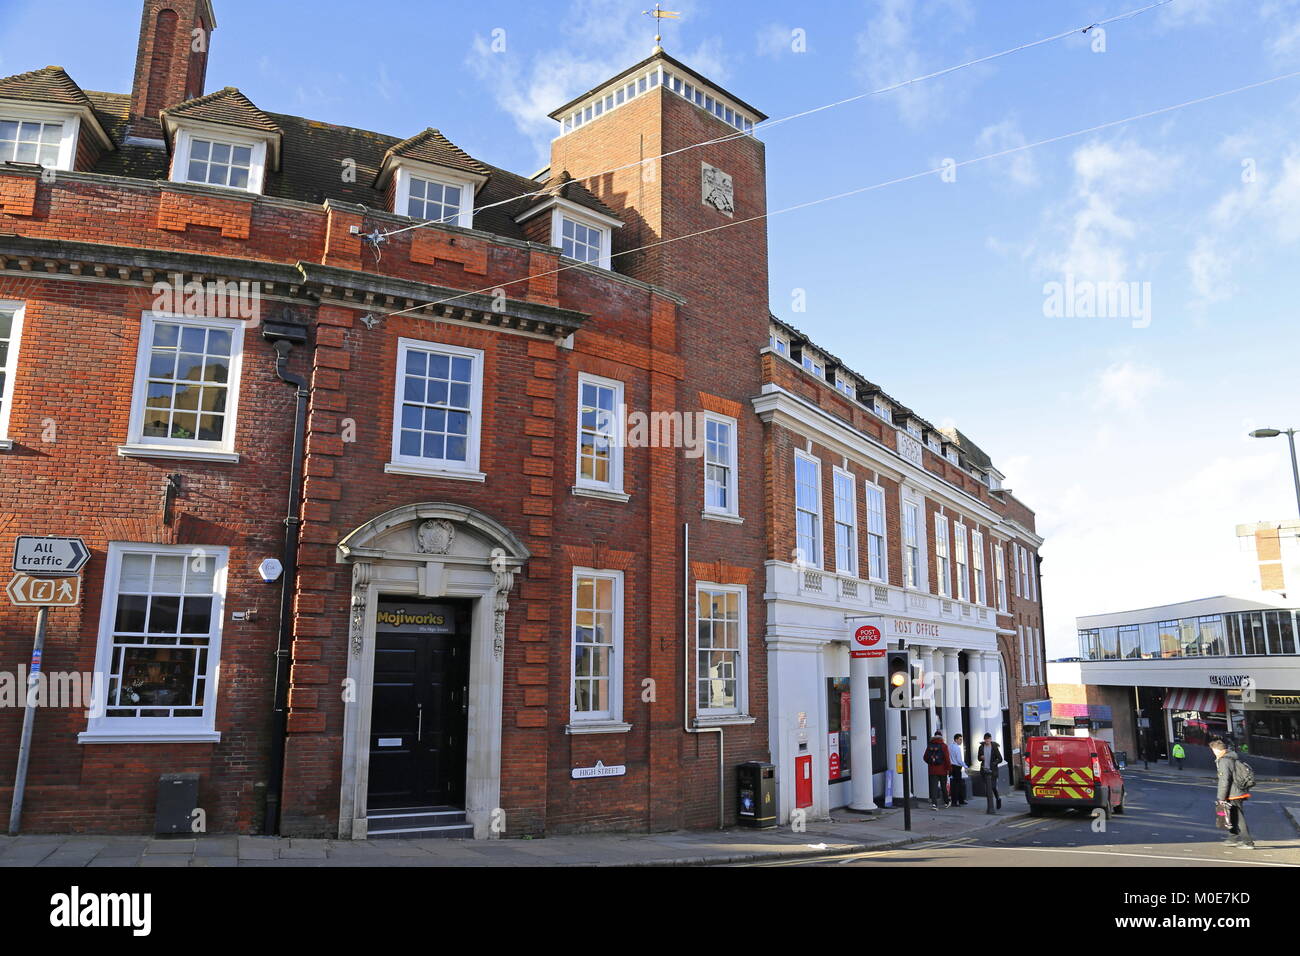 Post Office, High Street, Guildford, Surrey, England, Great Britain, United Kingdom, UK, Europe Stock Photo